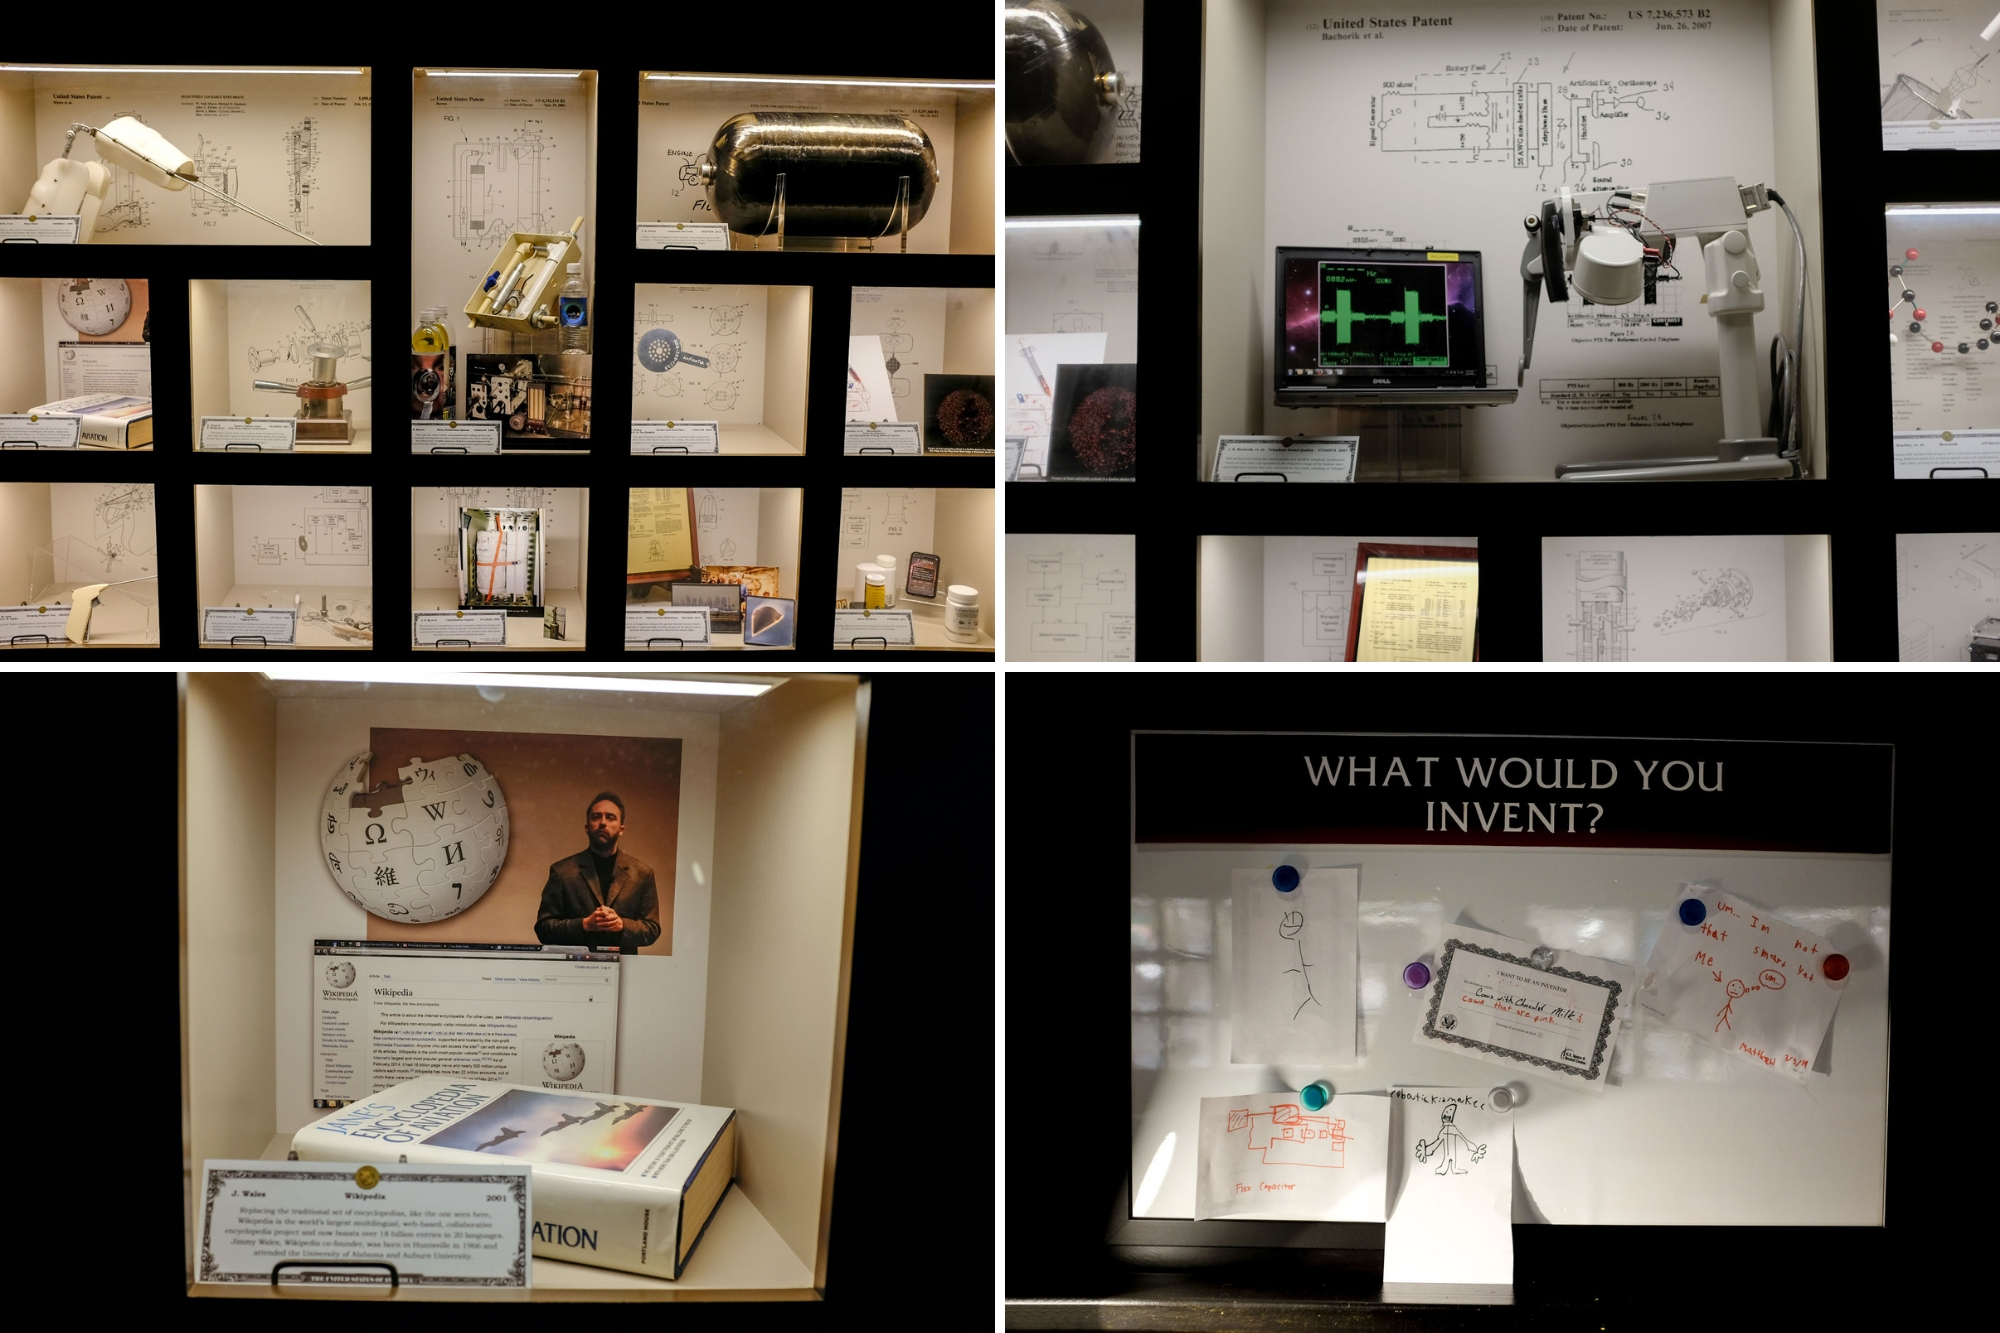 Collage: Inventions room at Space and Rocket Center